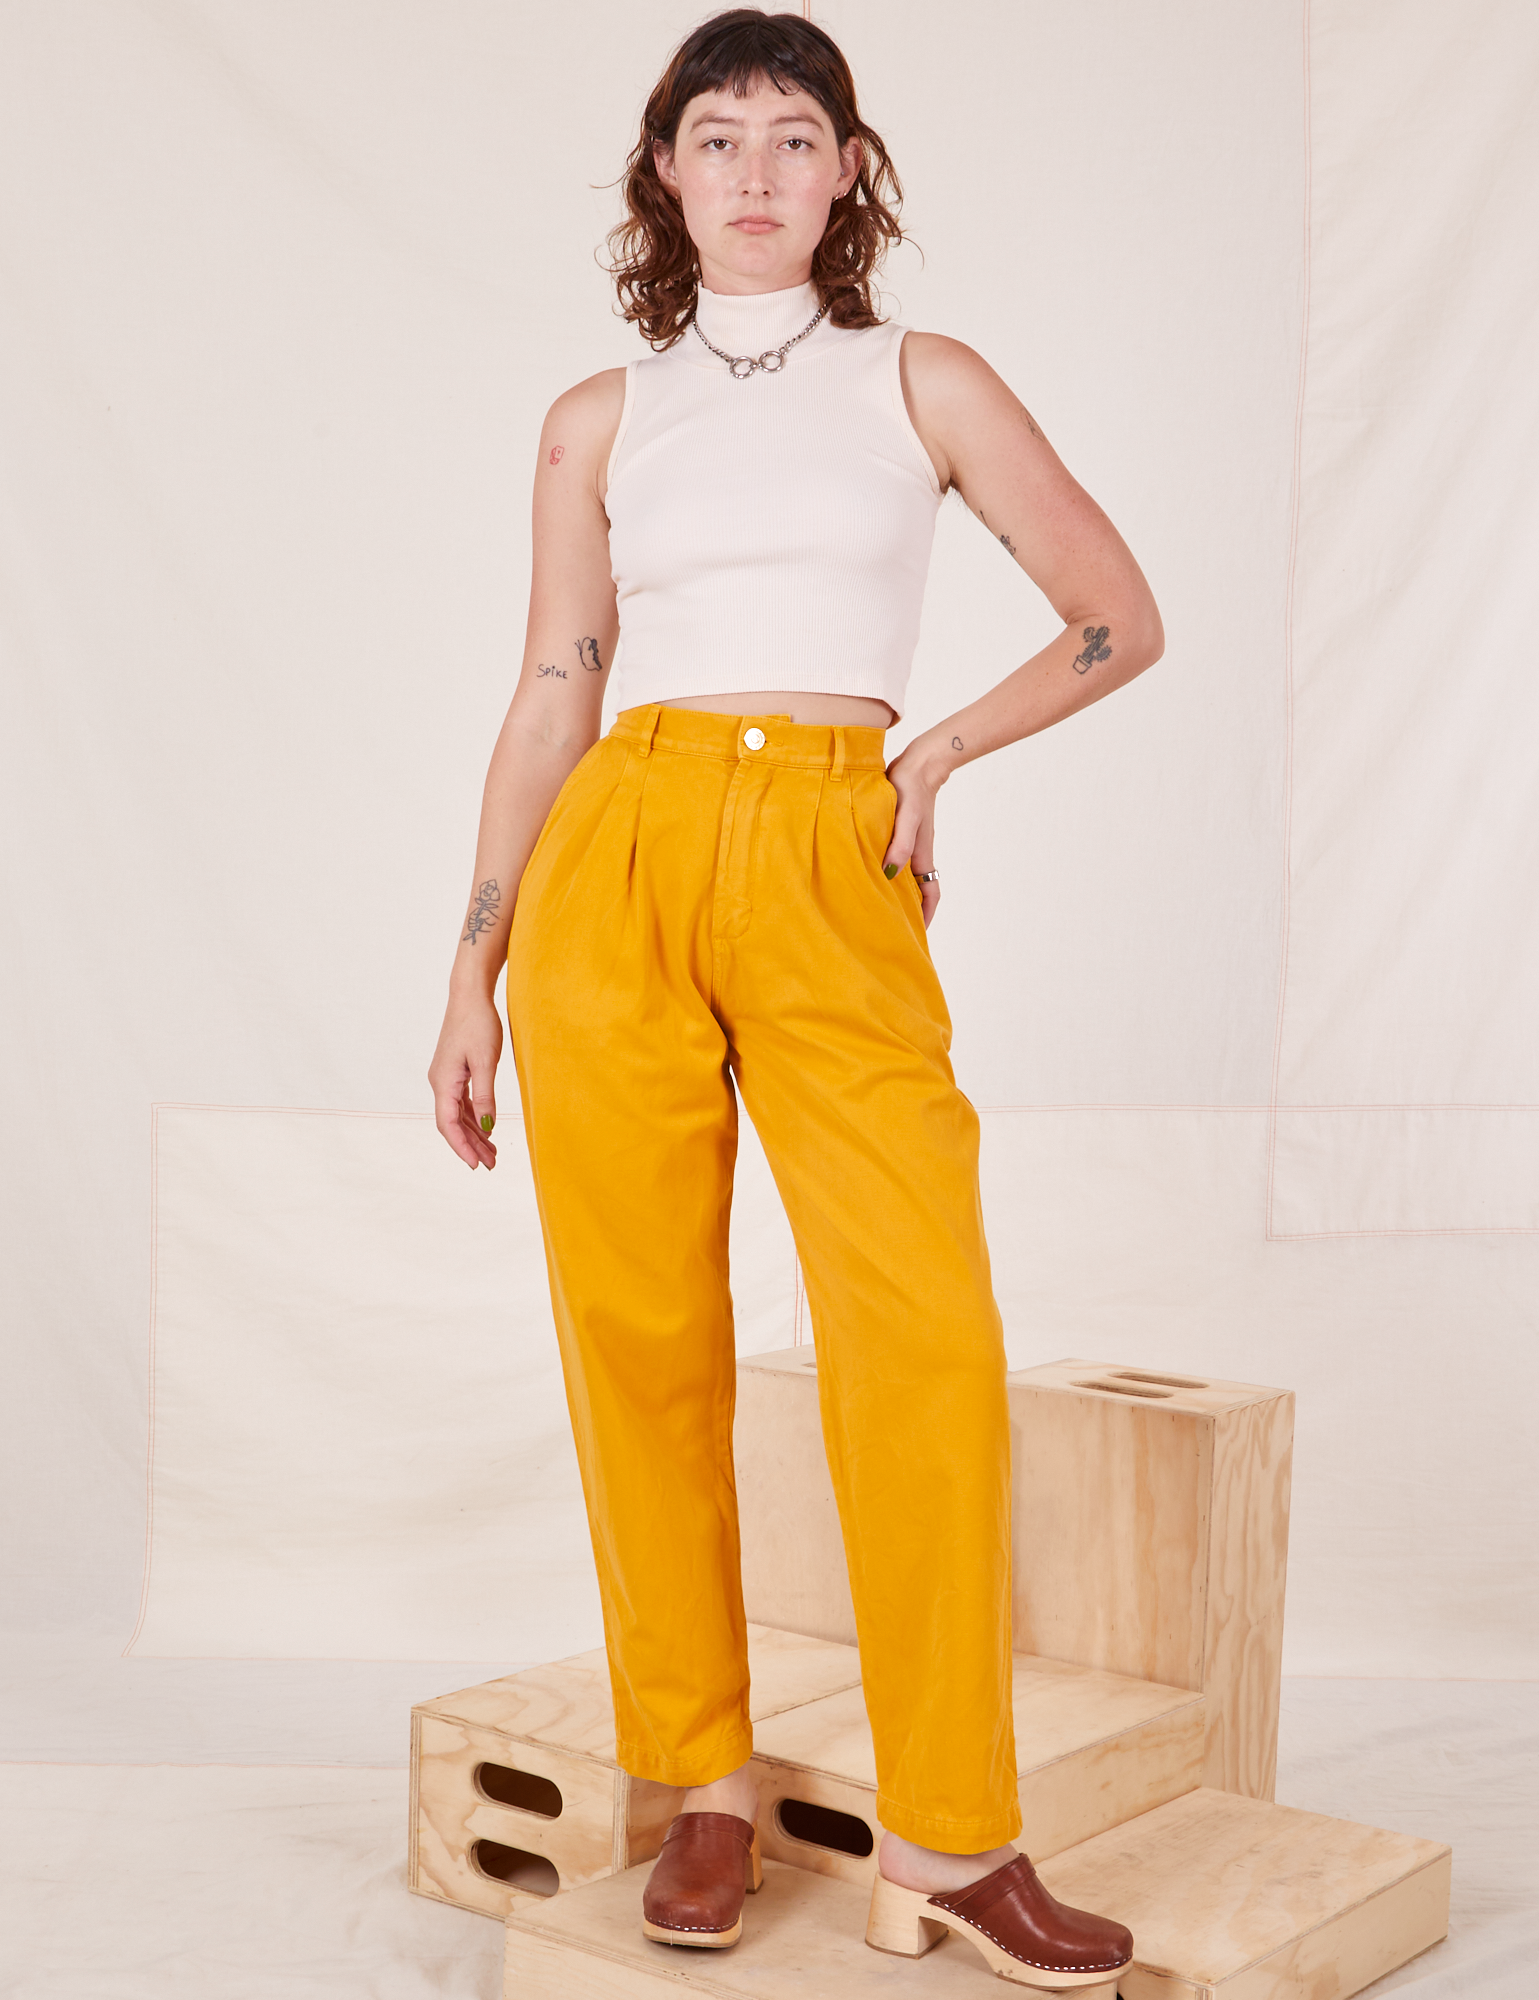 Organic Trousers in Mustard Yellow and Sleeveless Turtleneck in vintage tee off-white worn by Alex